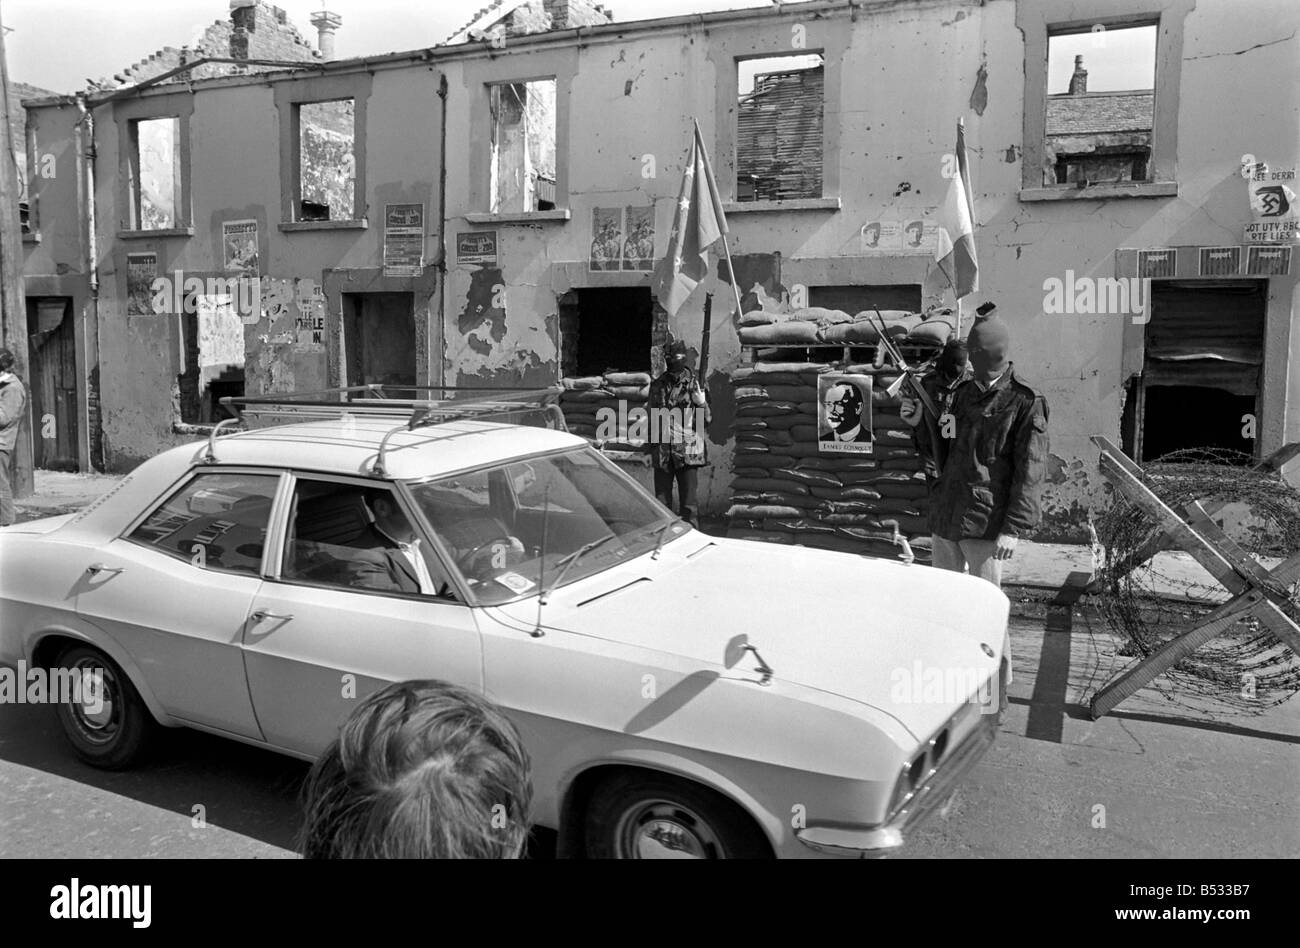 Northern Ireland April 1972. Members of the official IRA seen manning a barricade in the Bogside. April 1972 72-4762-005 Stock Photo